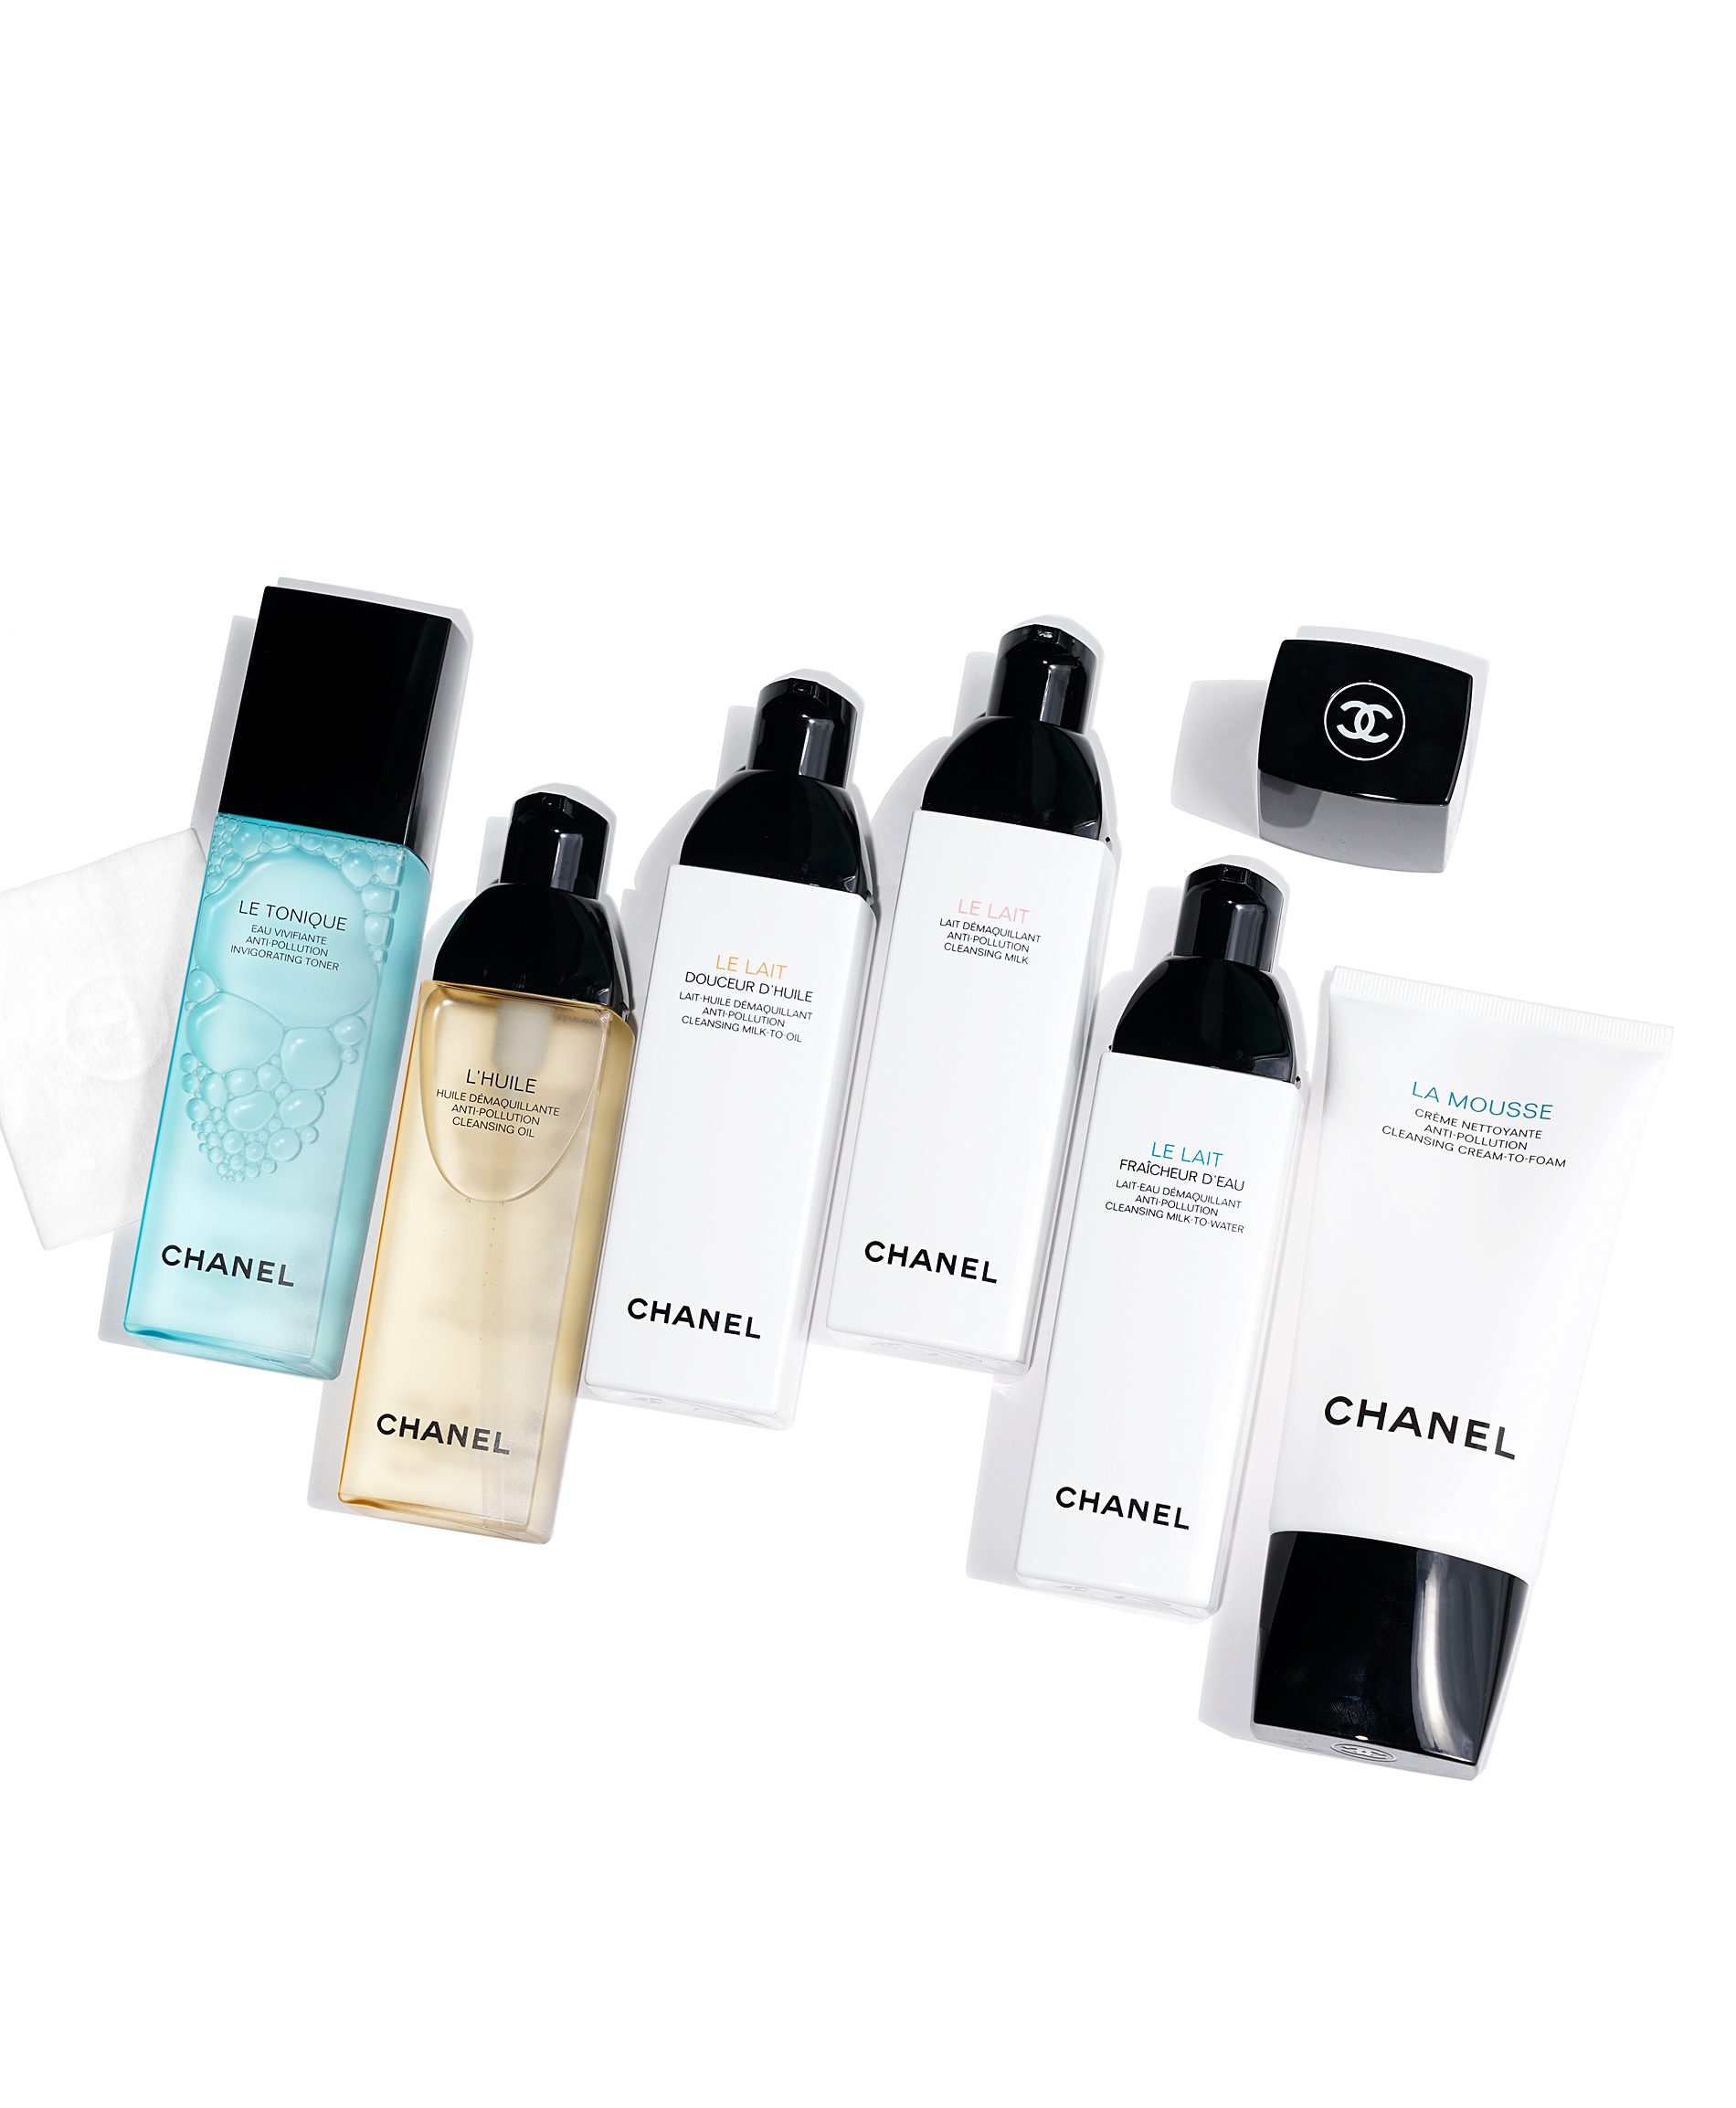 chanel cleansing mousse